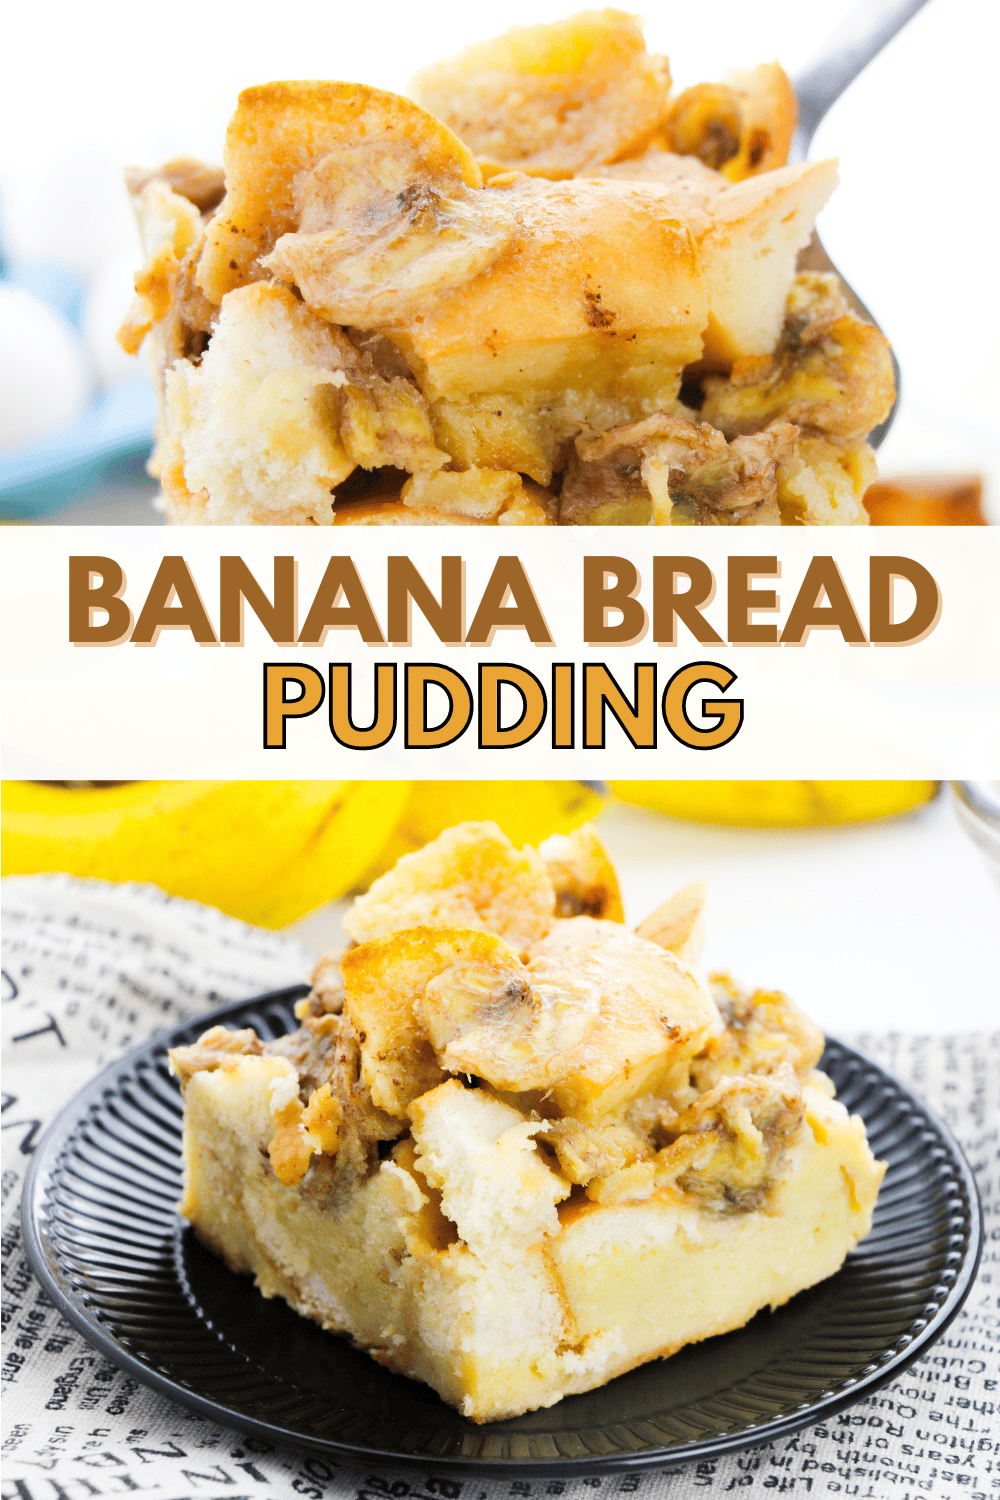 Banana bread pudding is a classic comfort food that never gets old. It is made with cinnamon and brown sugar for a delicious, sweet flavor. #bananabreadpudding #breadpudding #bananabread #comfortfood via @wondermomwannab